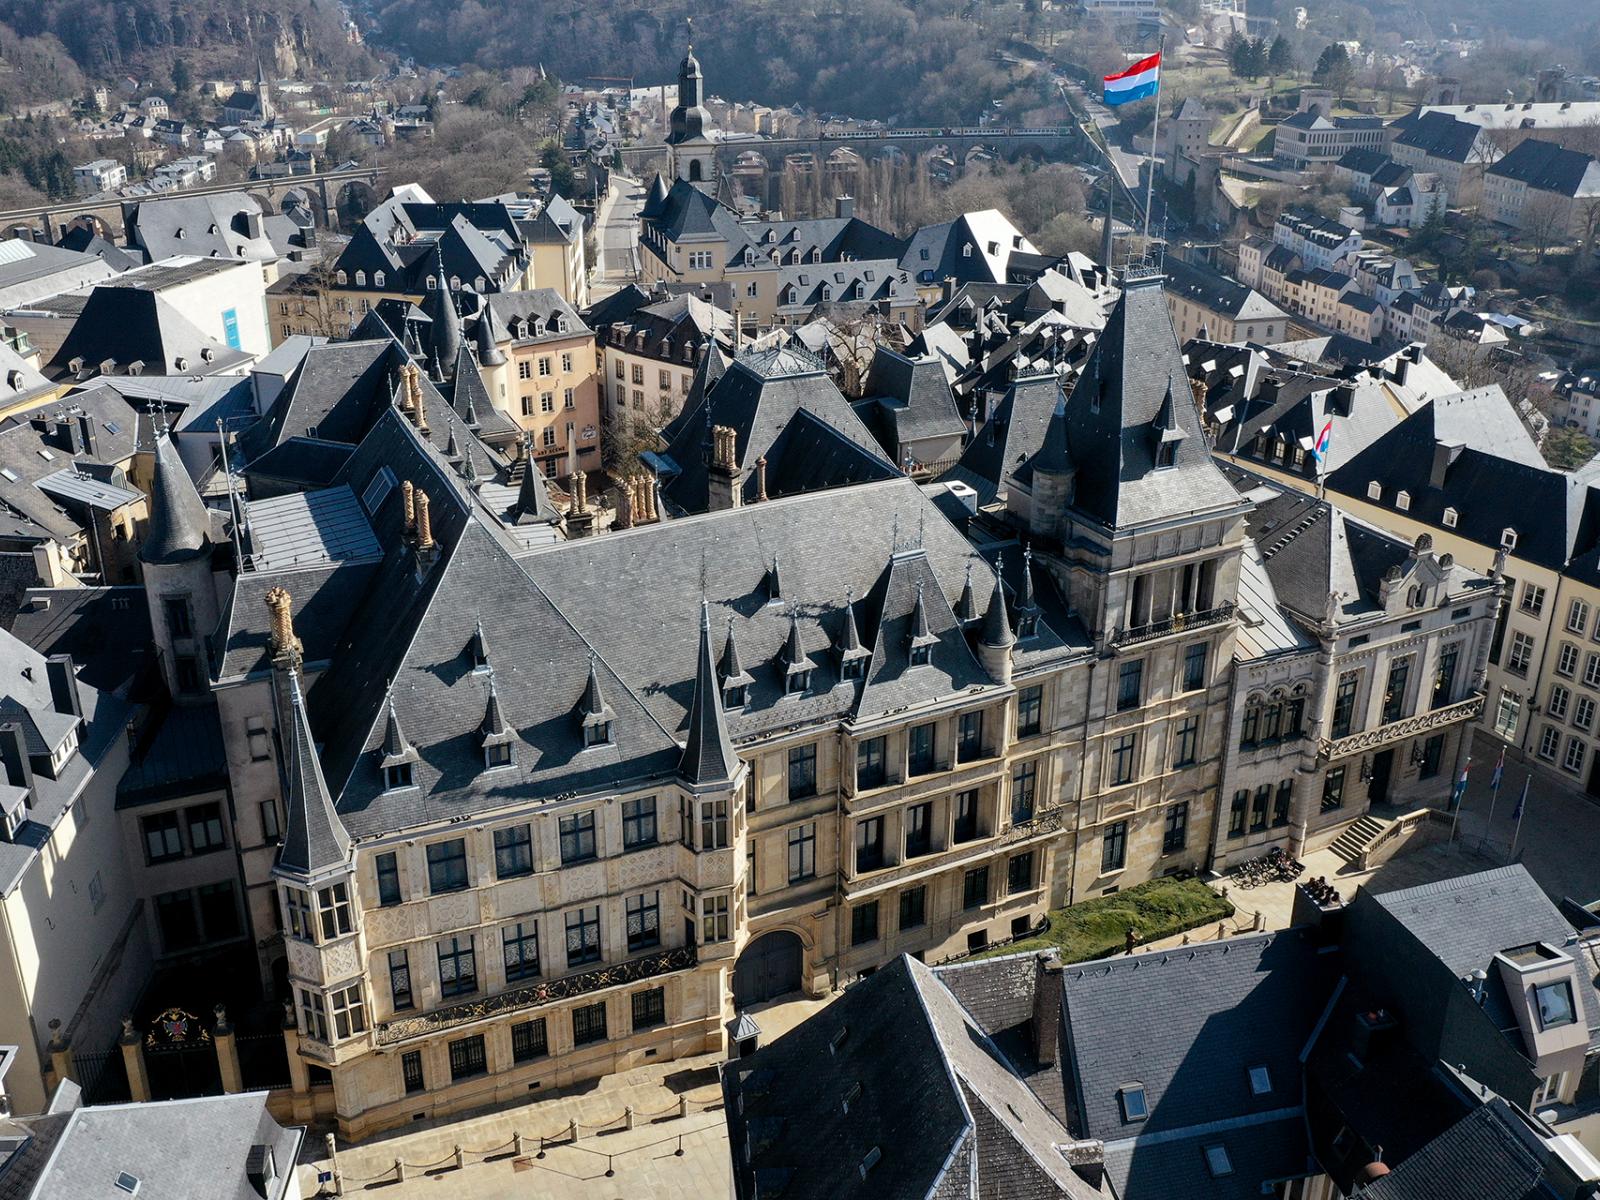 Aerial views of the Grand Ducal Palace